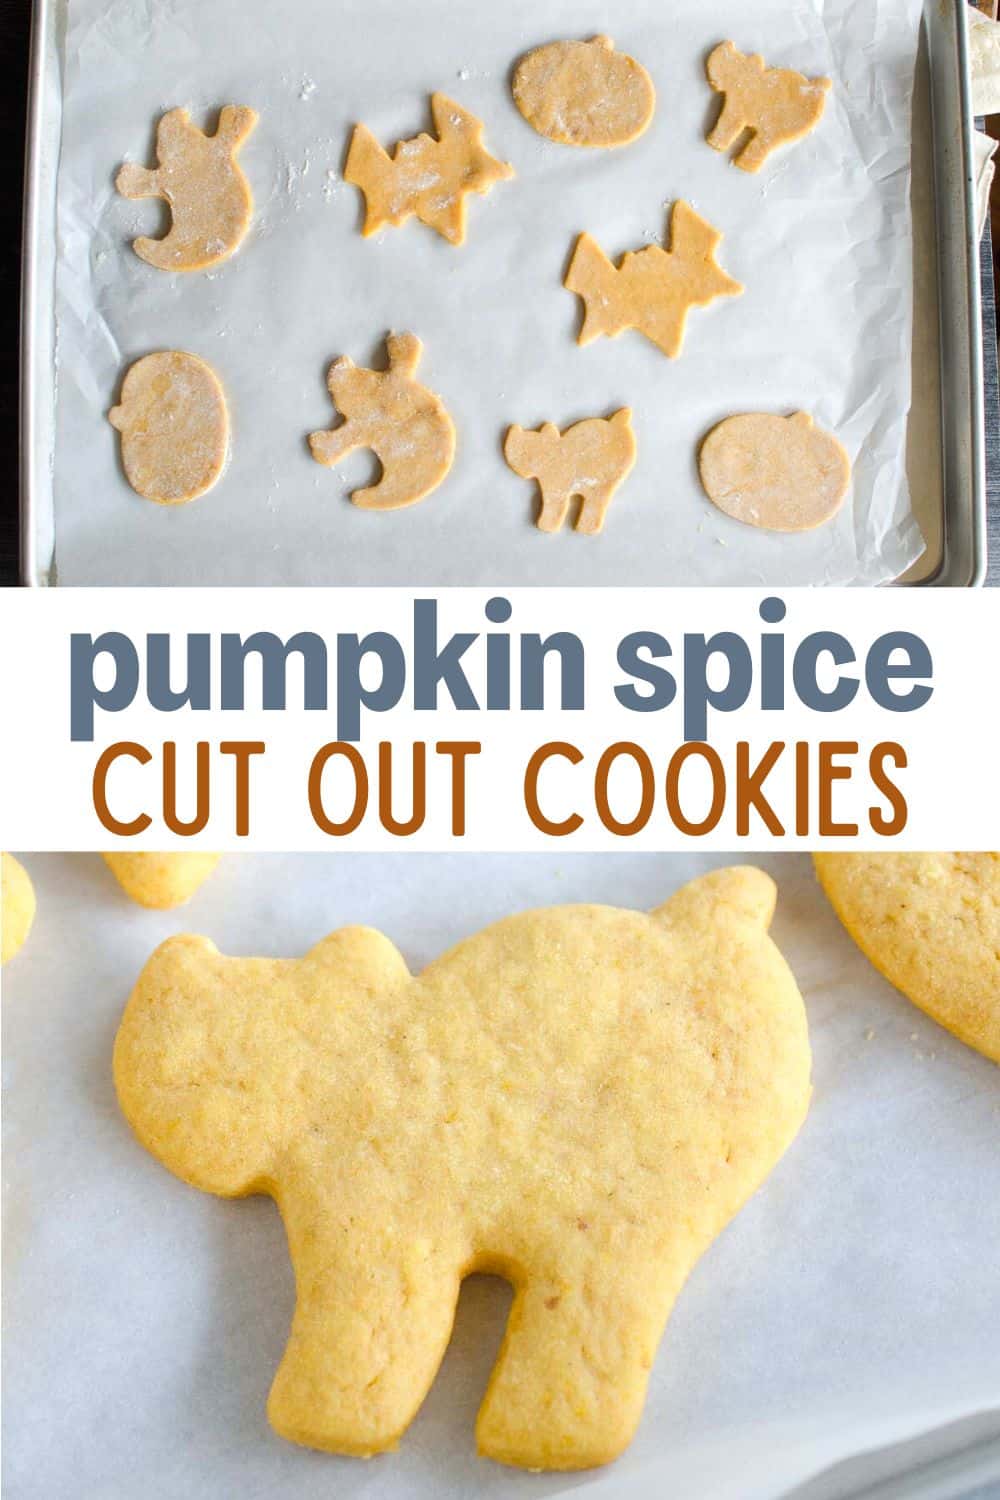 Try our easy pumpkin spice cut out cookies for Halloween and the fall season. These sugar cookies hold their shape and, with a little icing, are the perfect cookies to decorate for Halloween or Thanksgiving!